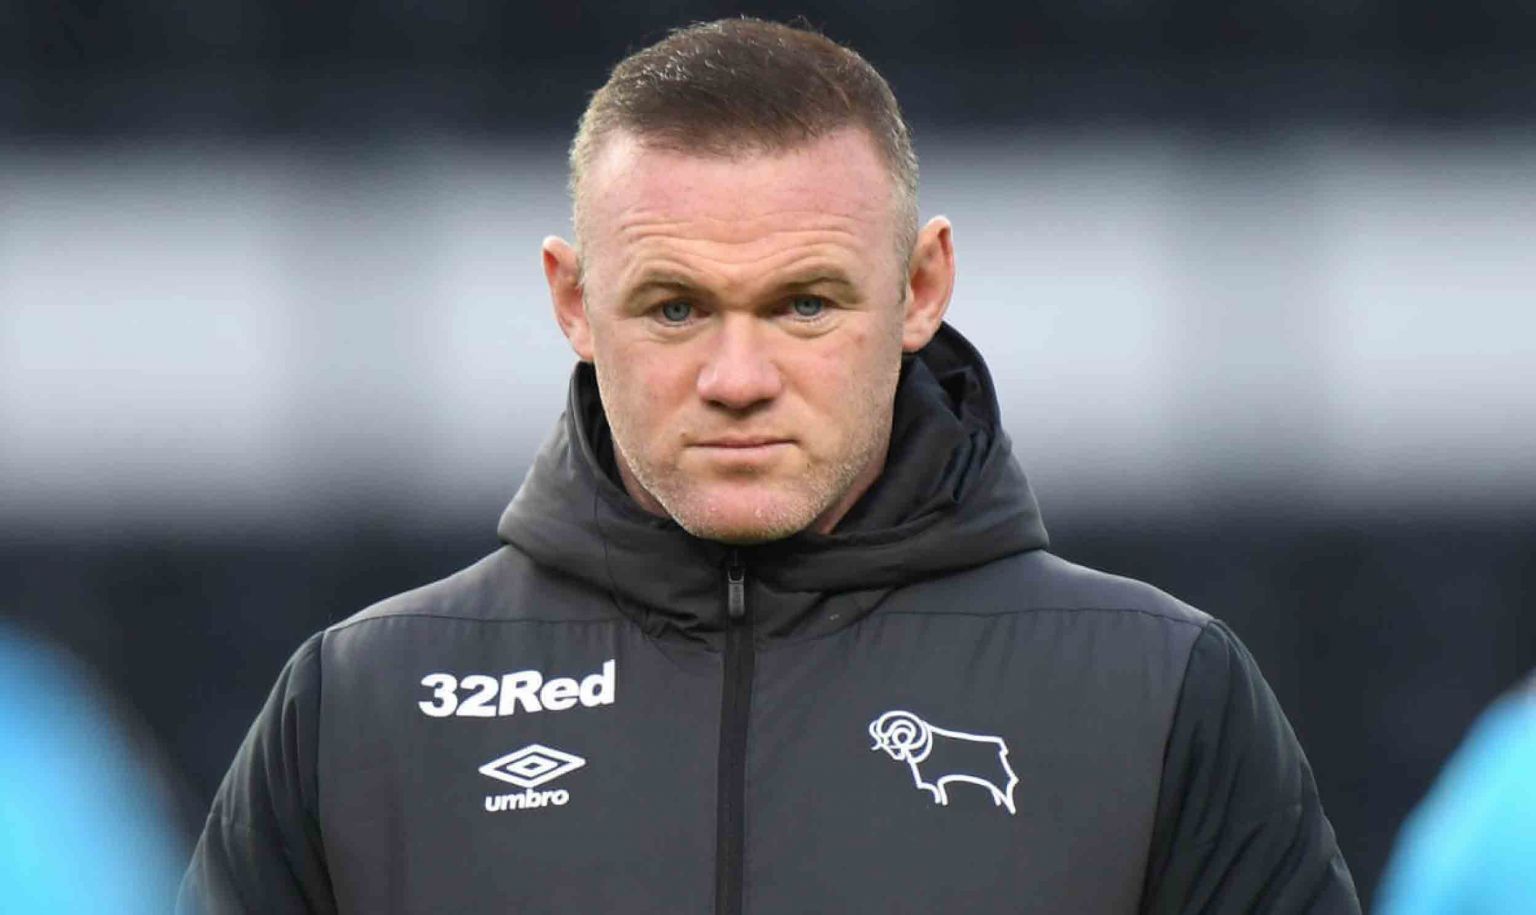 Derby County announce Wayne Rooney as their new manager as his playing